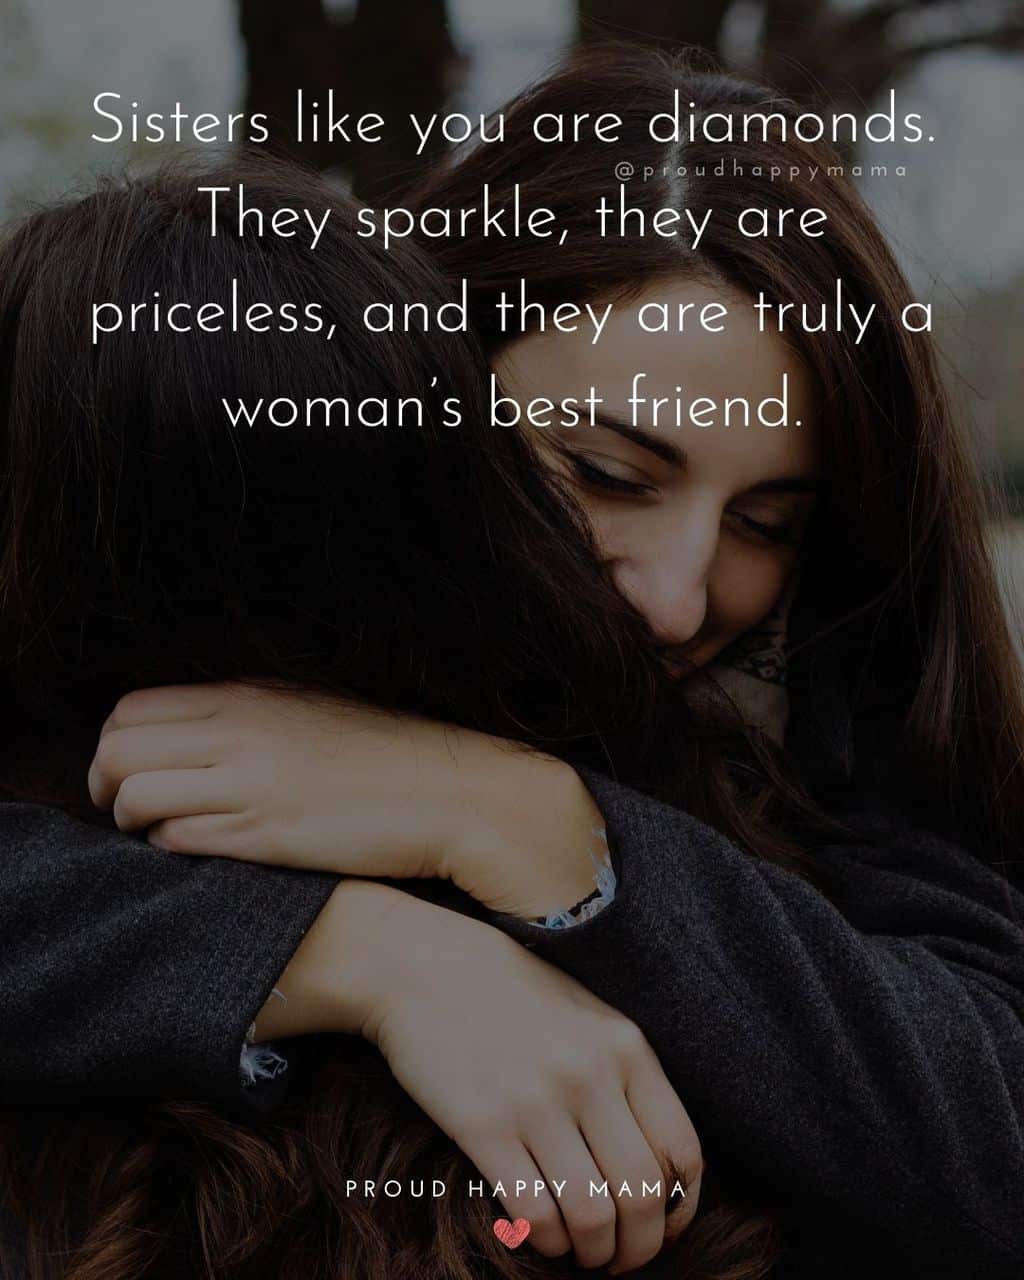 Sister quotes - Sisters like you are diamonds. They sparkle, they are priceless, and they are truly a womans best friend.